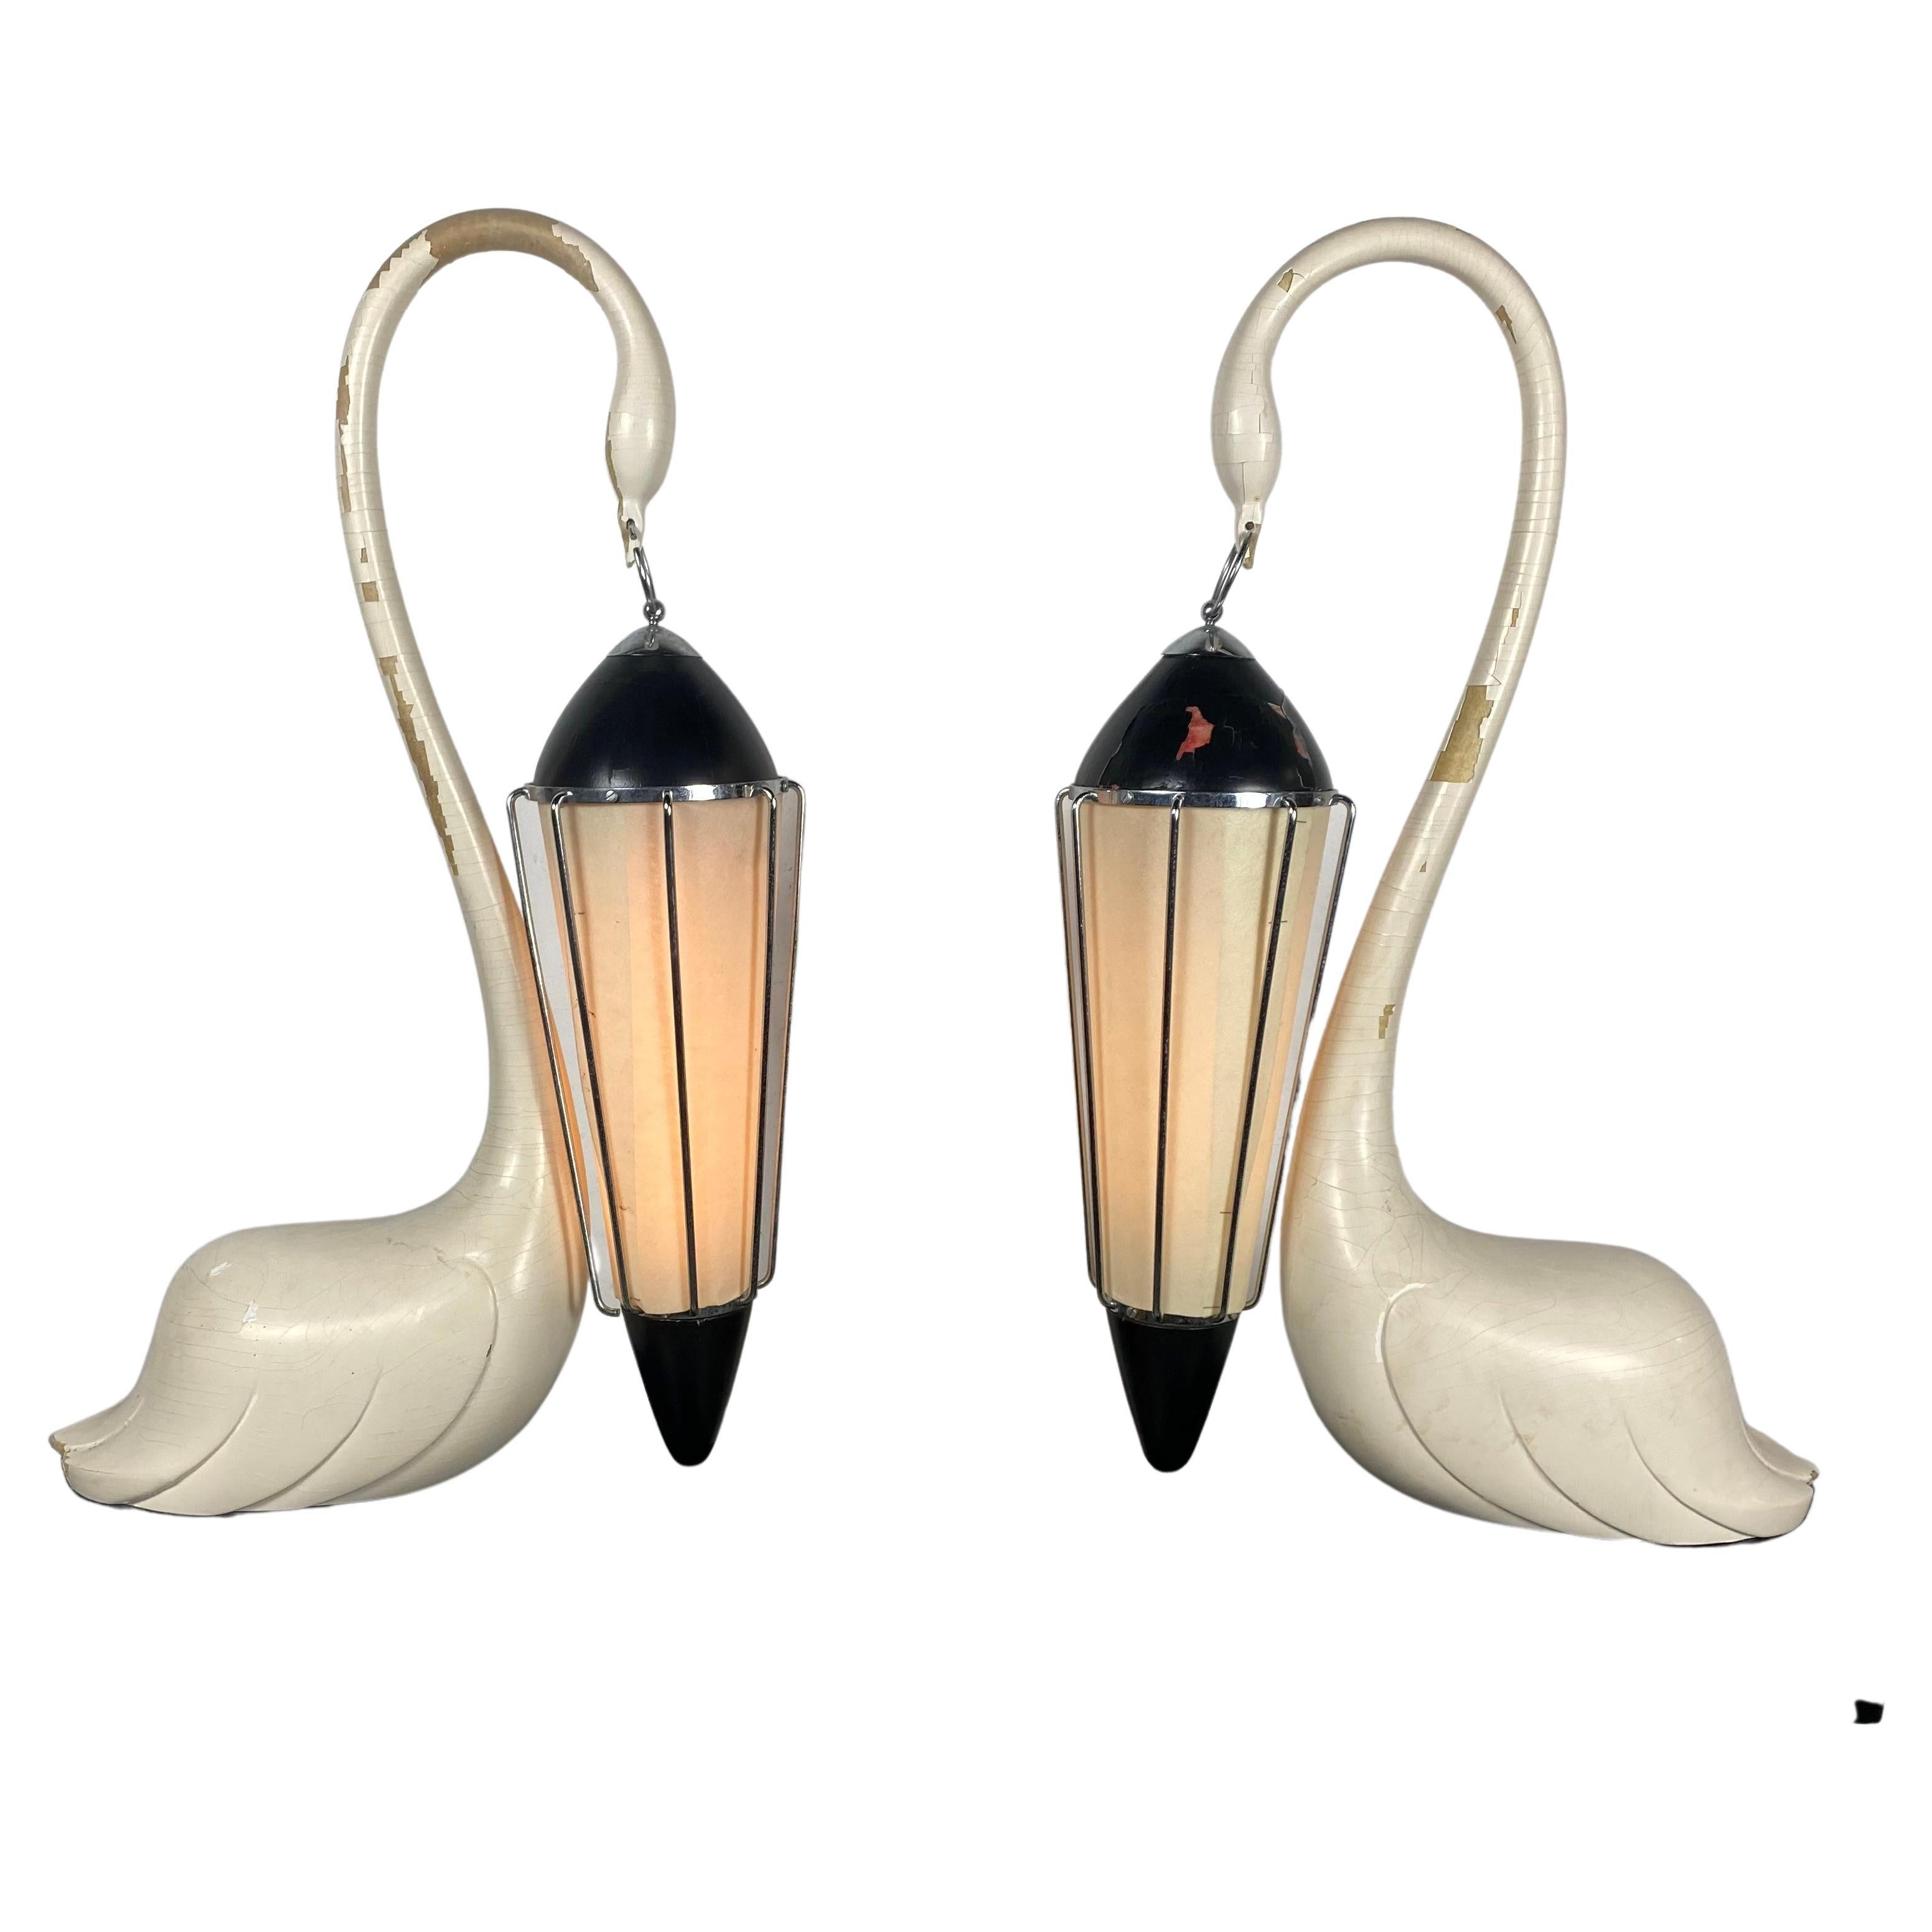 Pair Vintage Aldo Tura Swan Lacquer Wood and Brass Lamps, 1950s, Italy